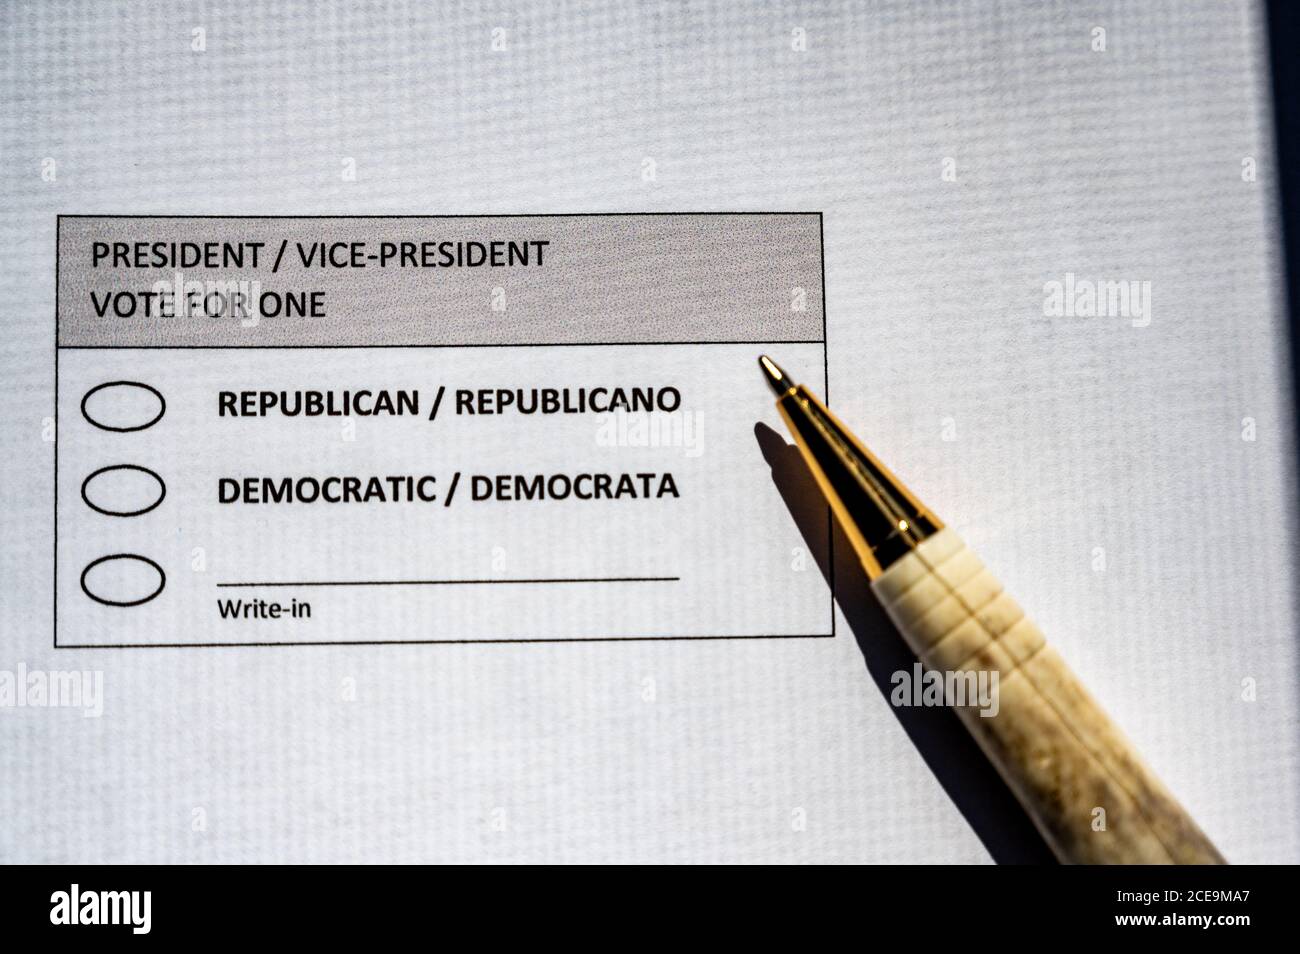 Concept of US presidential election ballot being completed Stock Photo